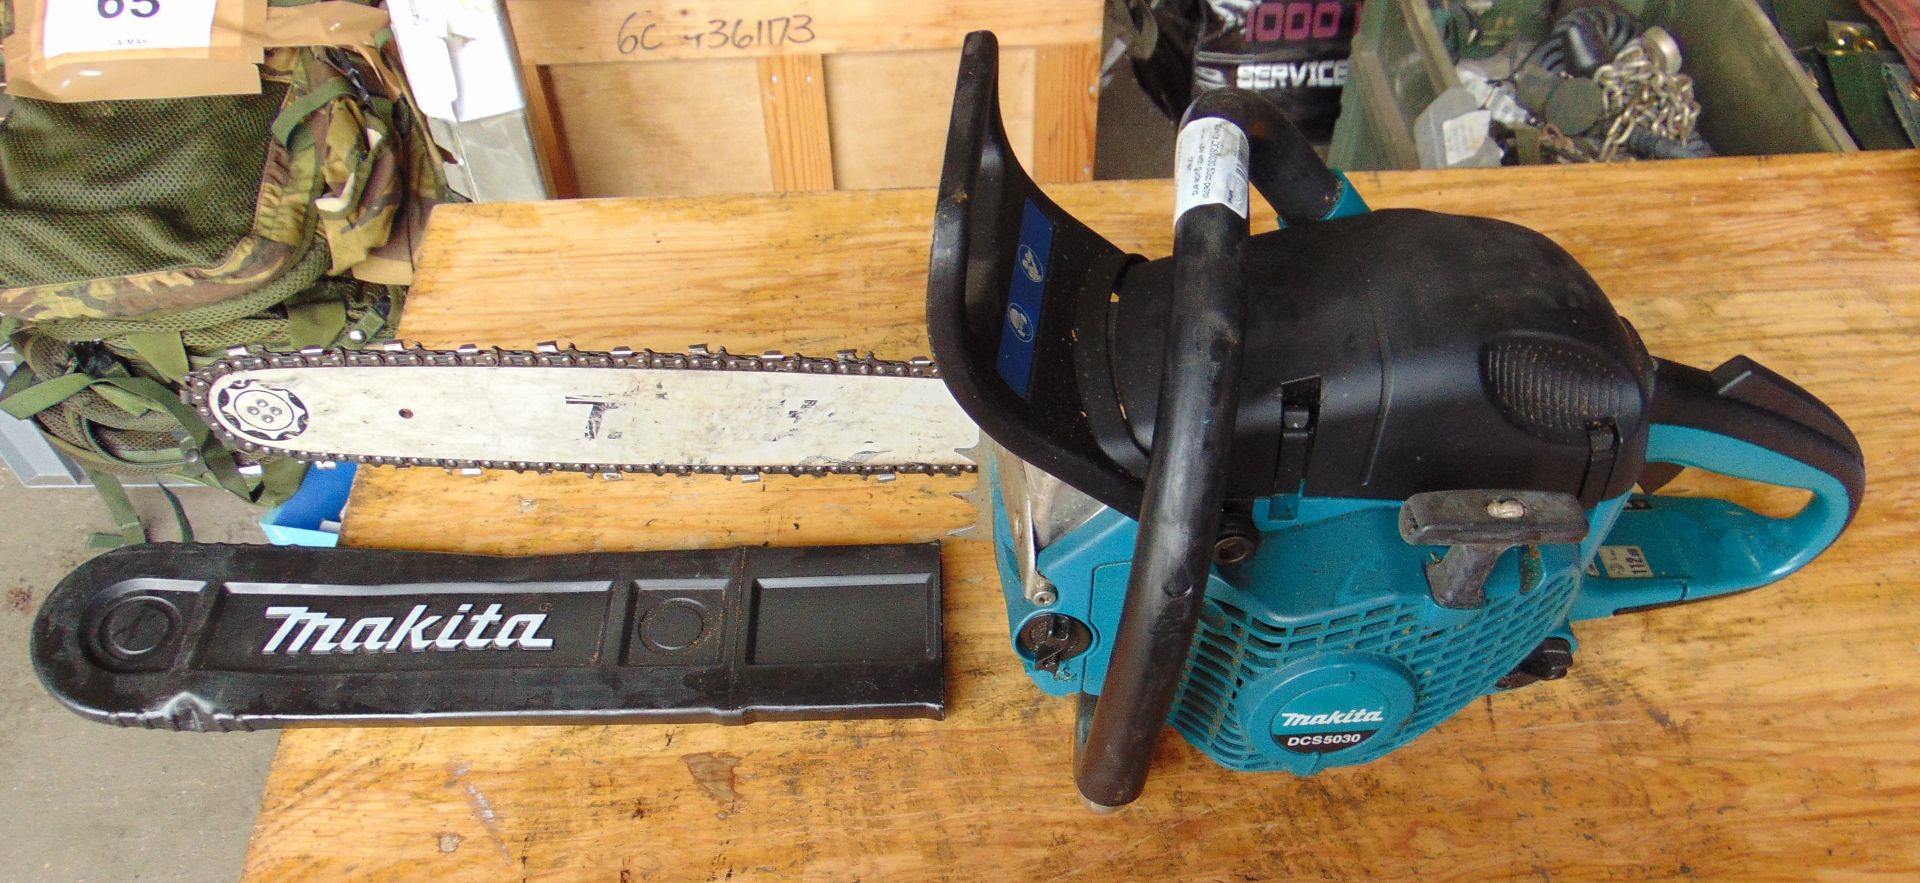 MAKITA DCS 5030 50CC Chainsaw c/w Chain Guard from MoD. - Image 2 of 4